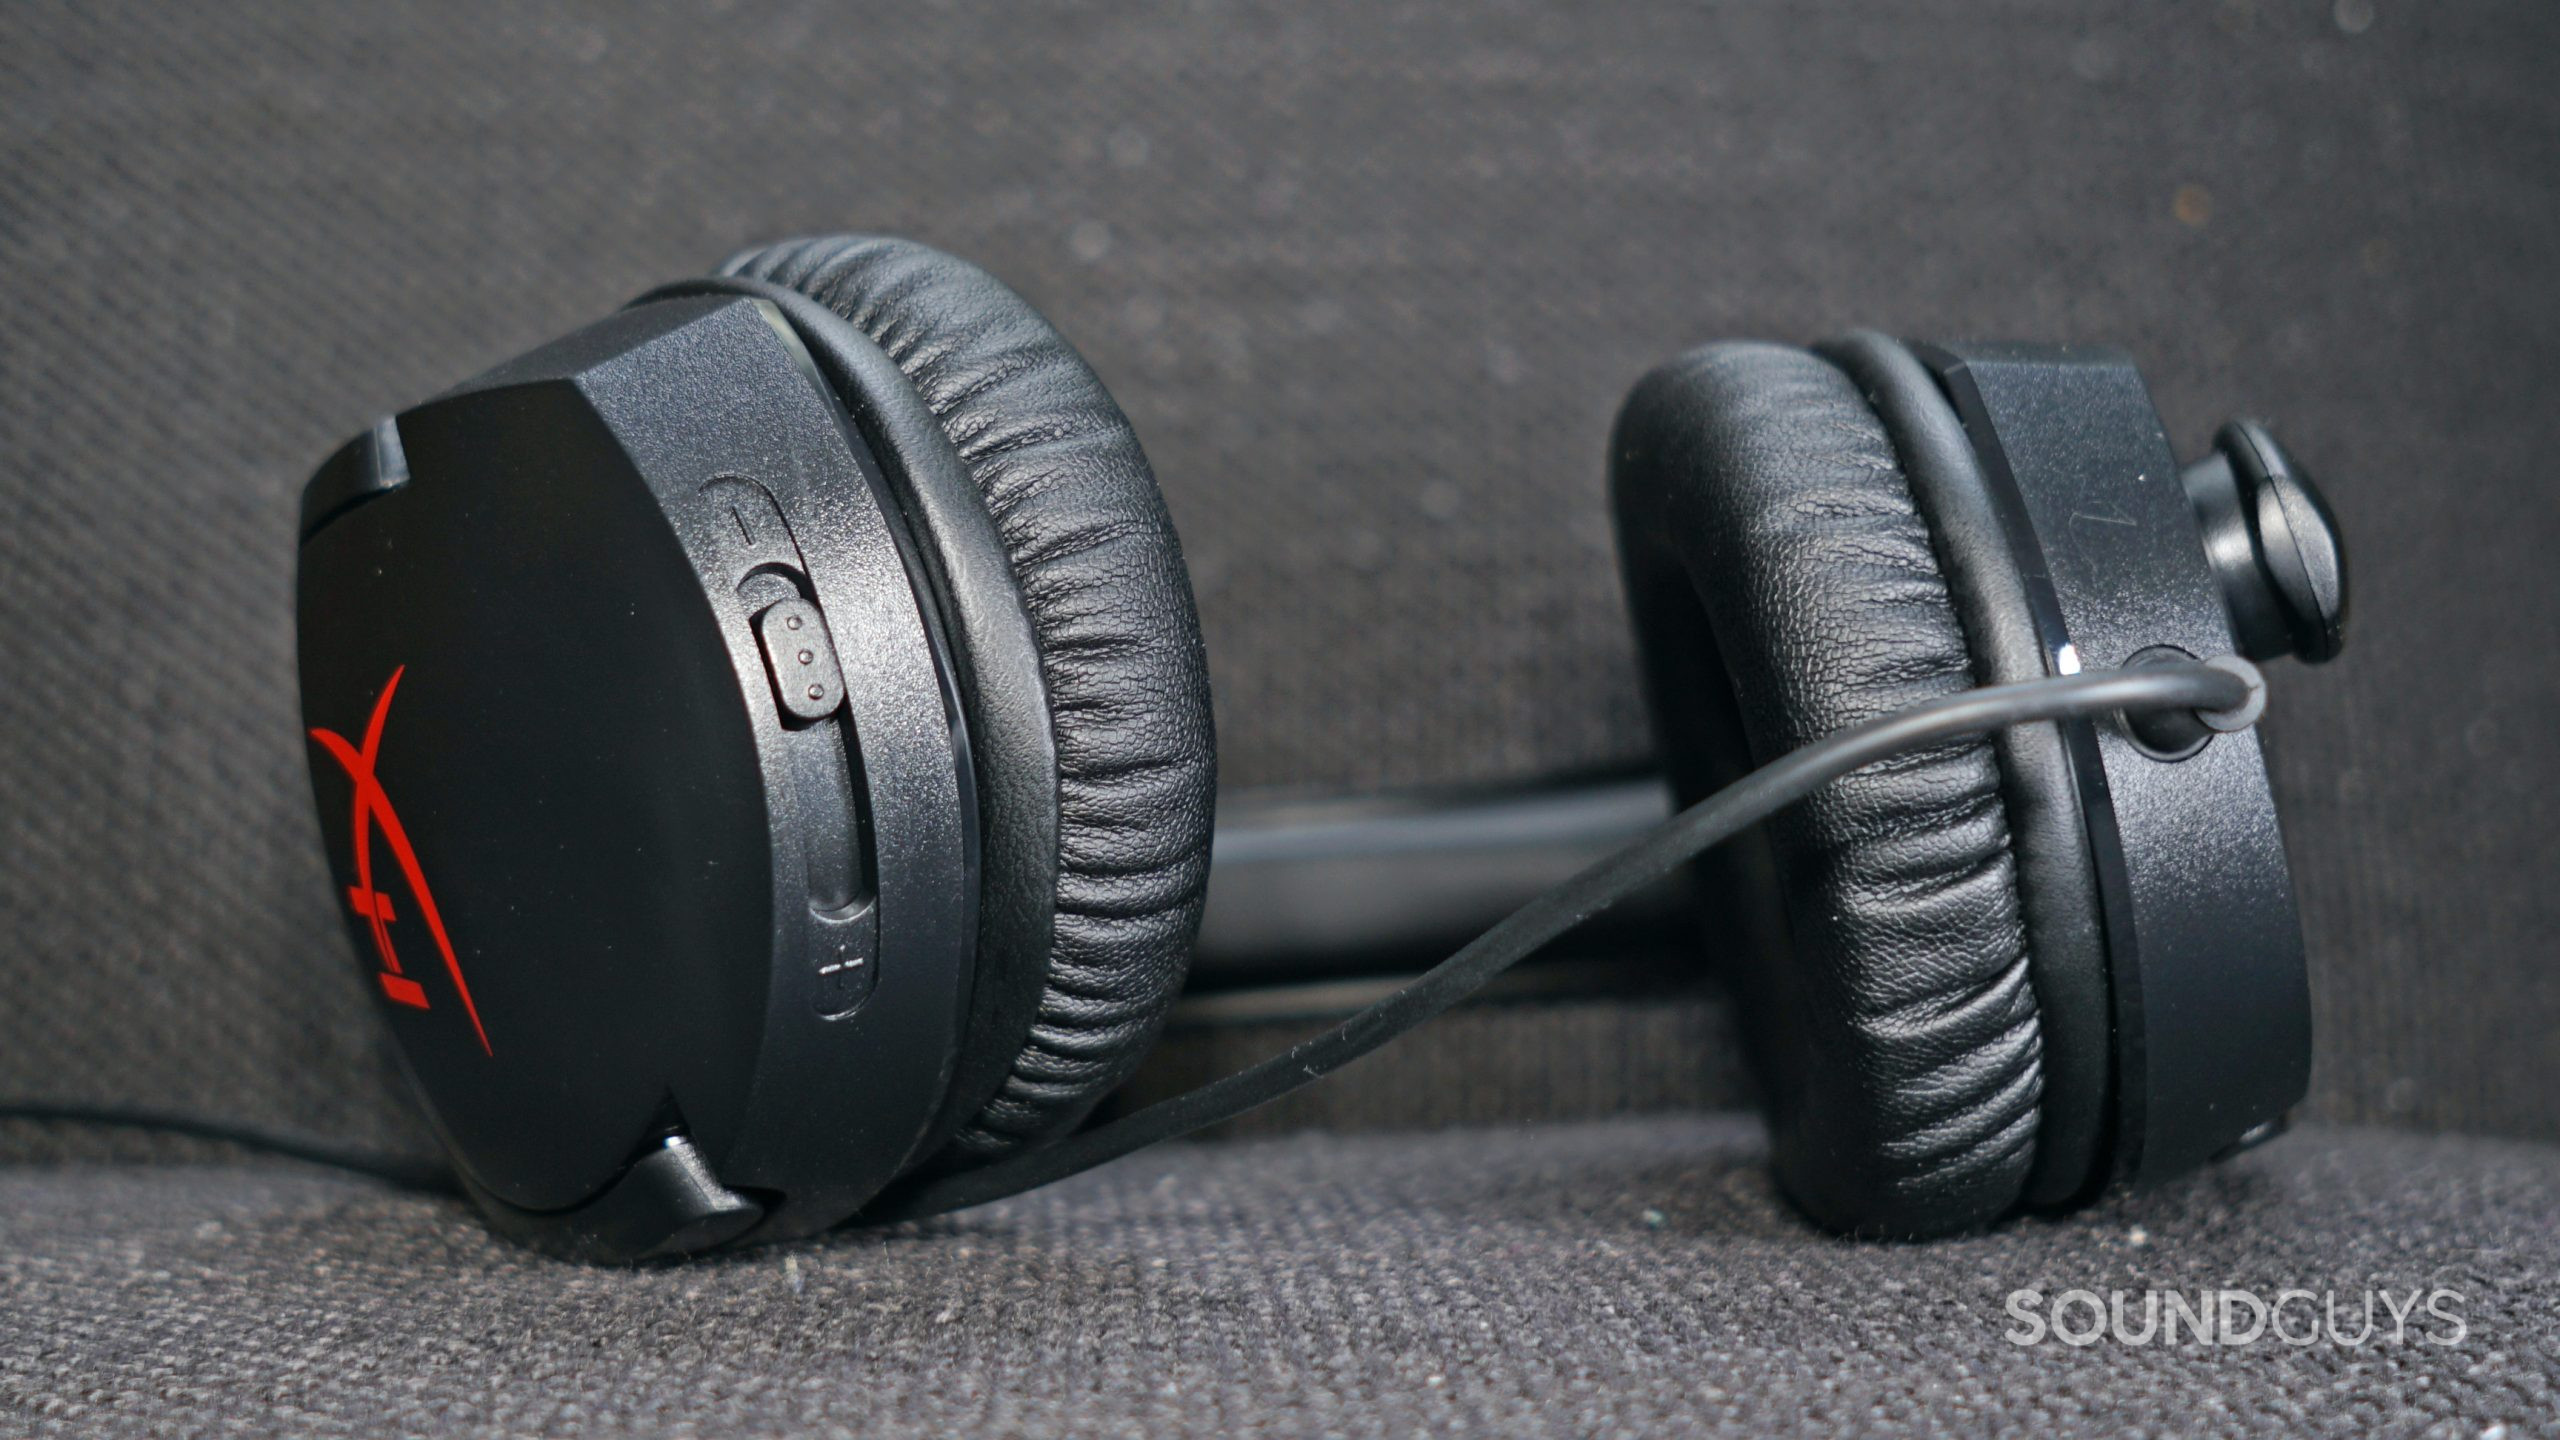 The HyperX Cloud Stinger lays on a fabric surface with the focus on its volume dial.